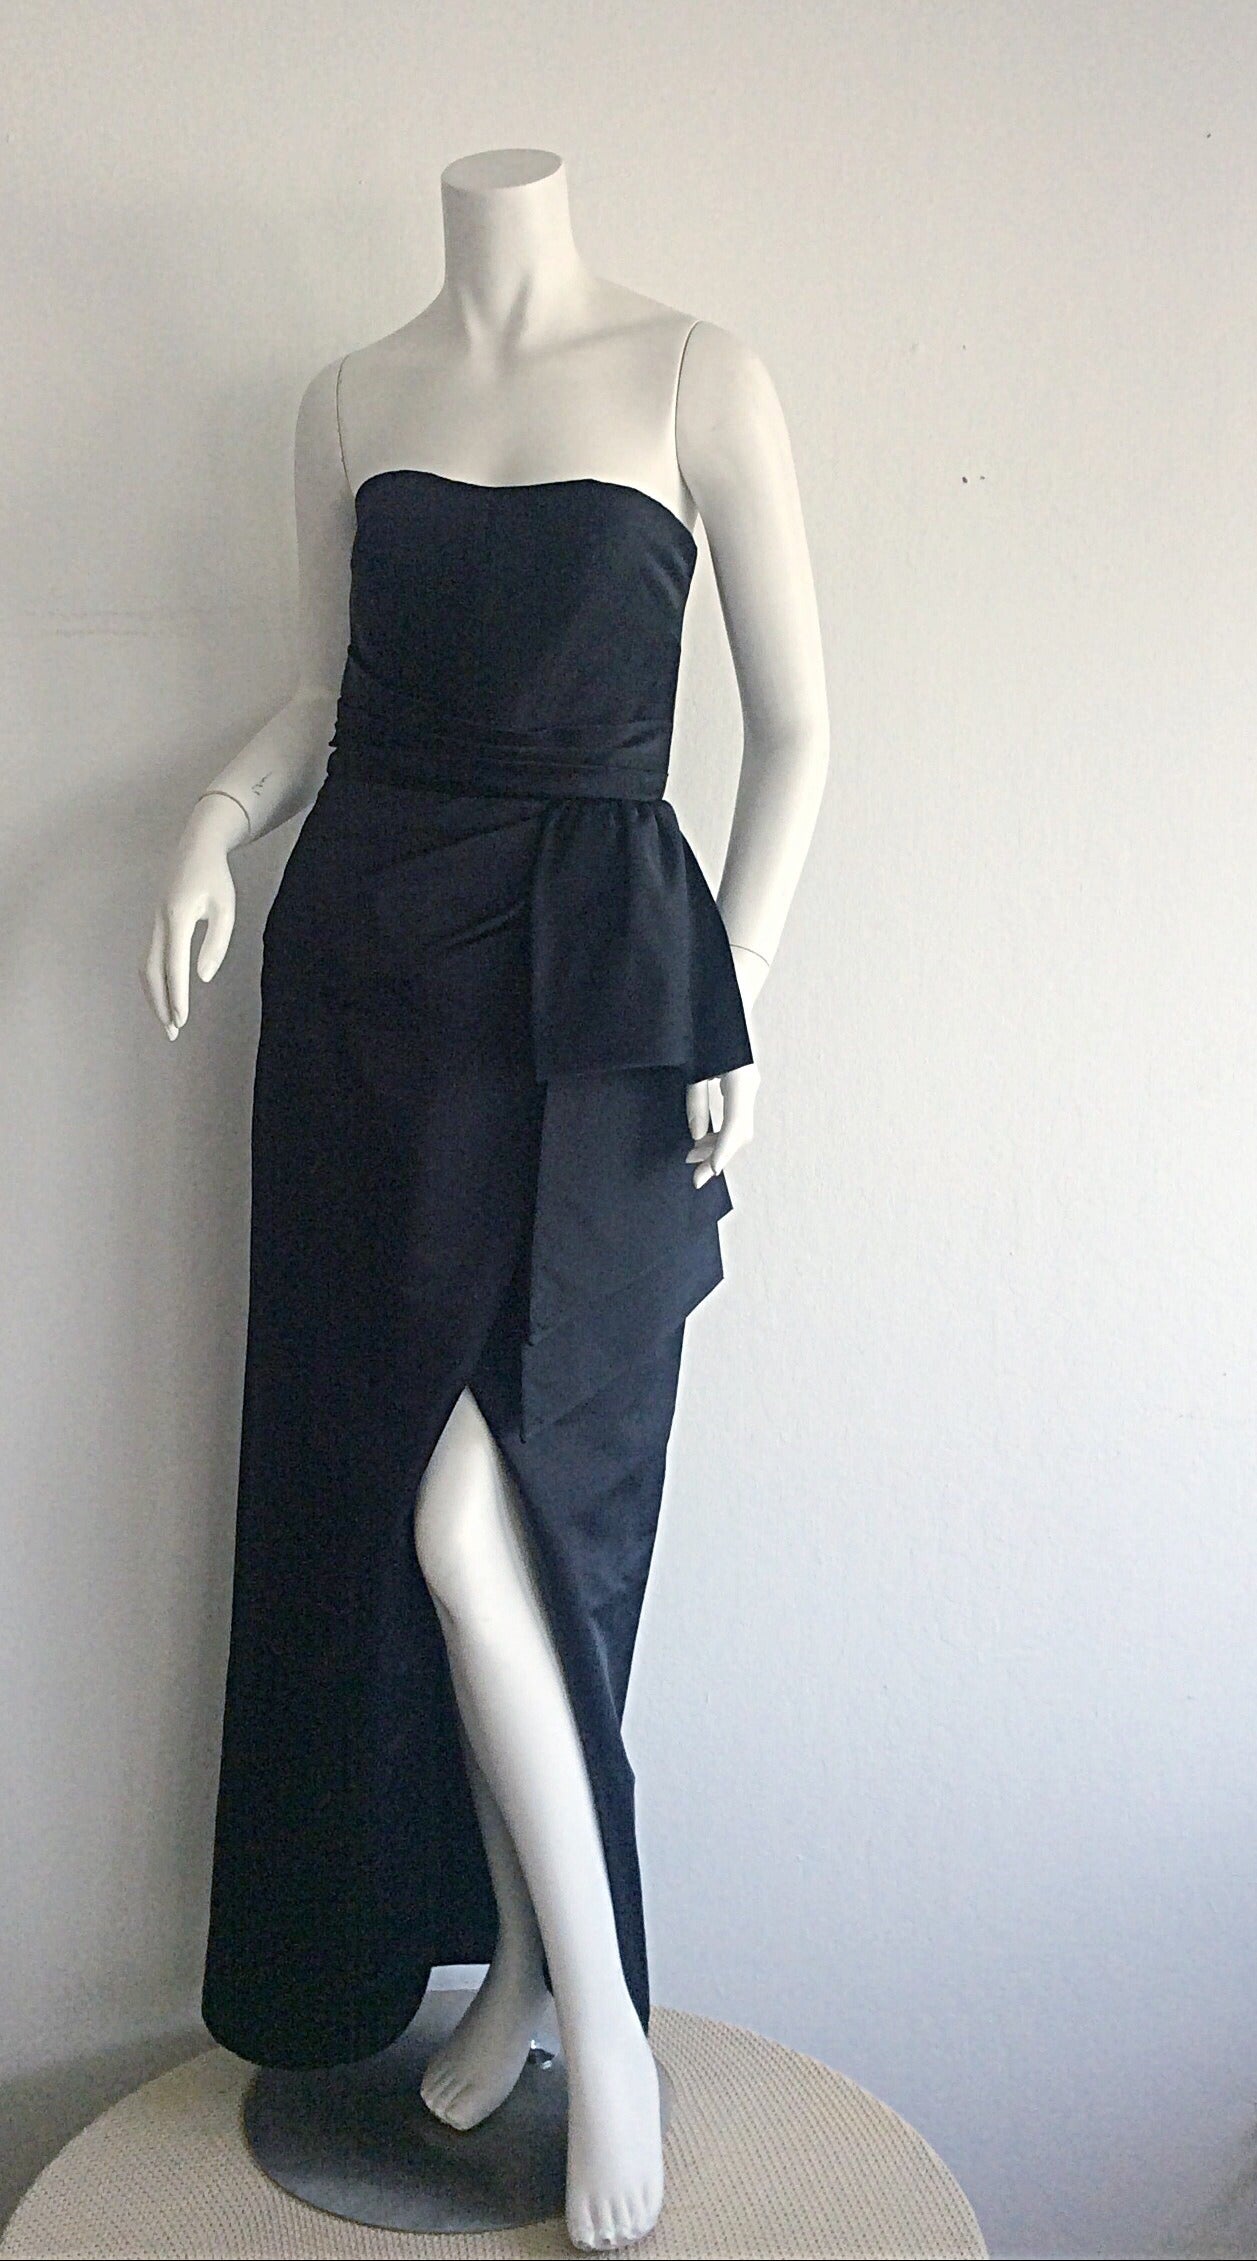 Beautiful strapless Victor Costa black silk satin gown! Origami/bow detail at waist, with a sexy slit at front hem. Extremely flattering fit, that is the perfect, classic black gown! Fully lined. In great condition. Approximately Size Small - Small